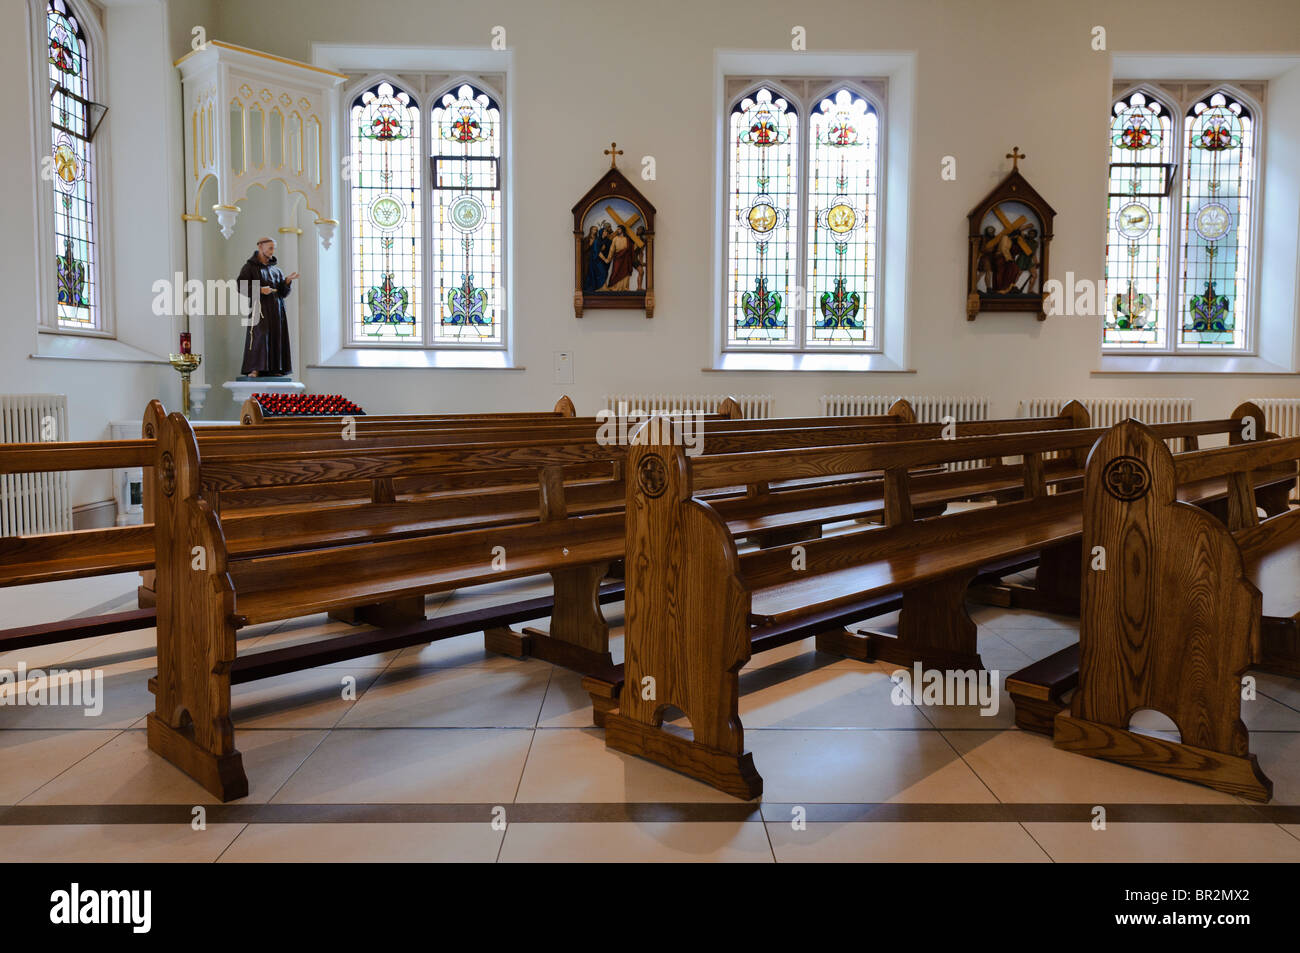 Pews, statue of St Francis of Assisi and stations of the cross in a Roman Catholic church Stock Photo